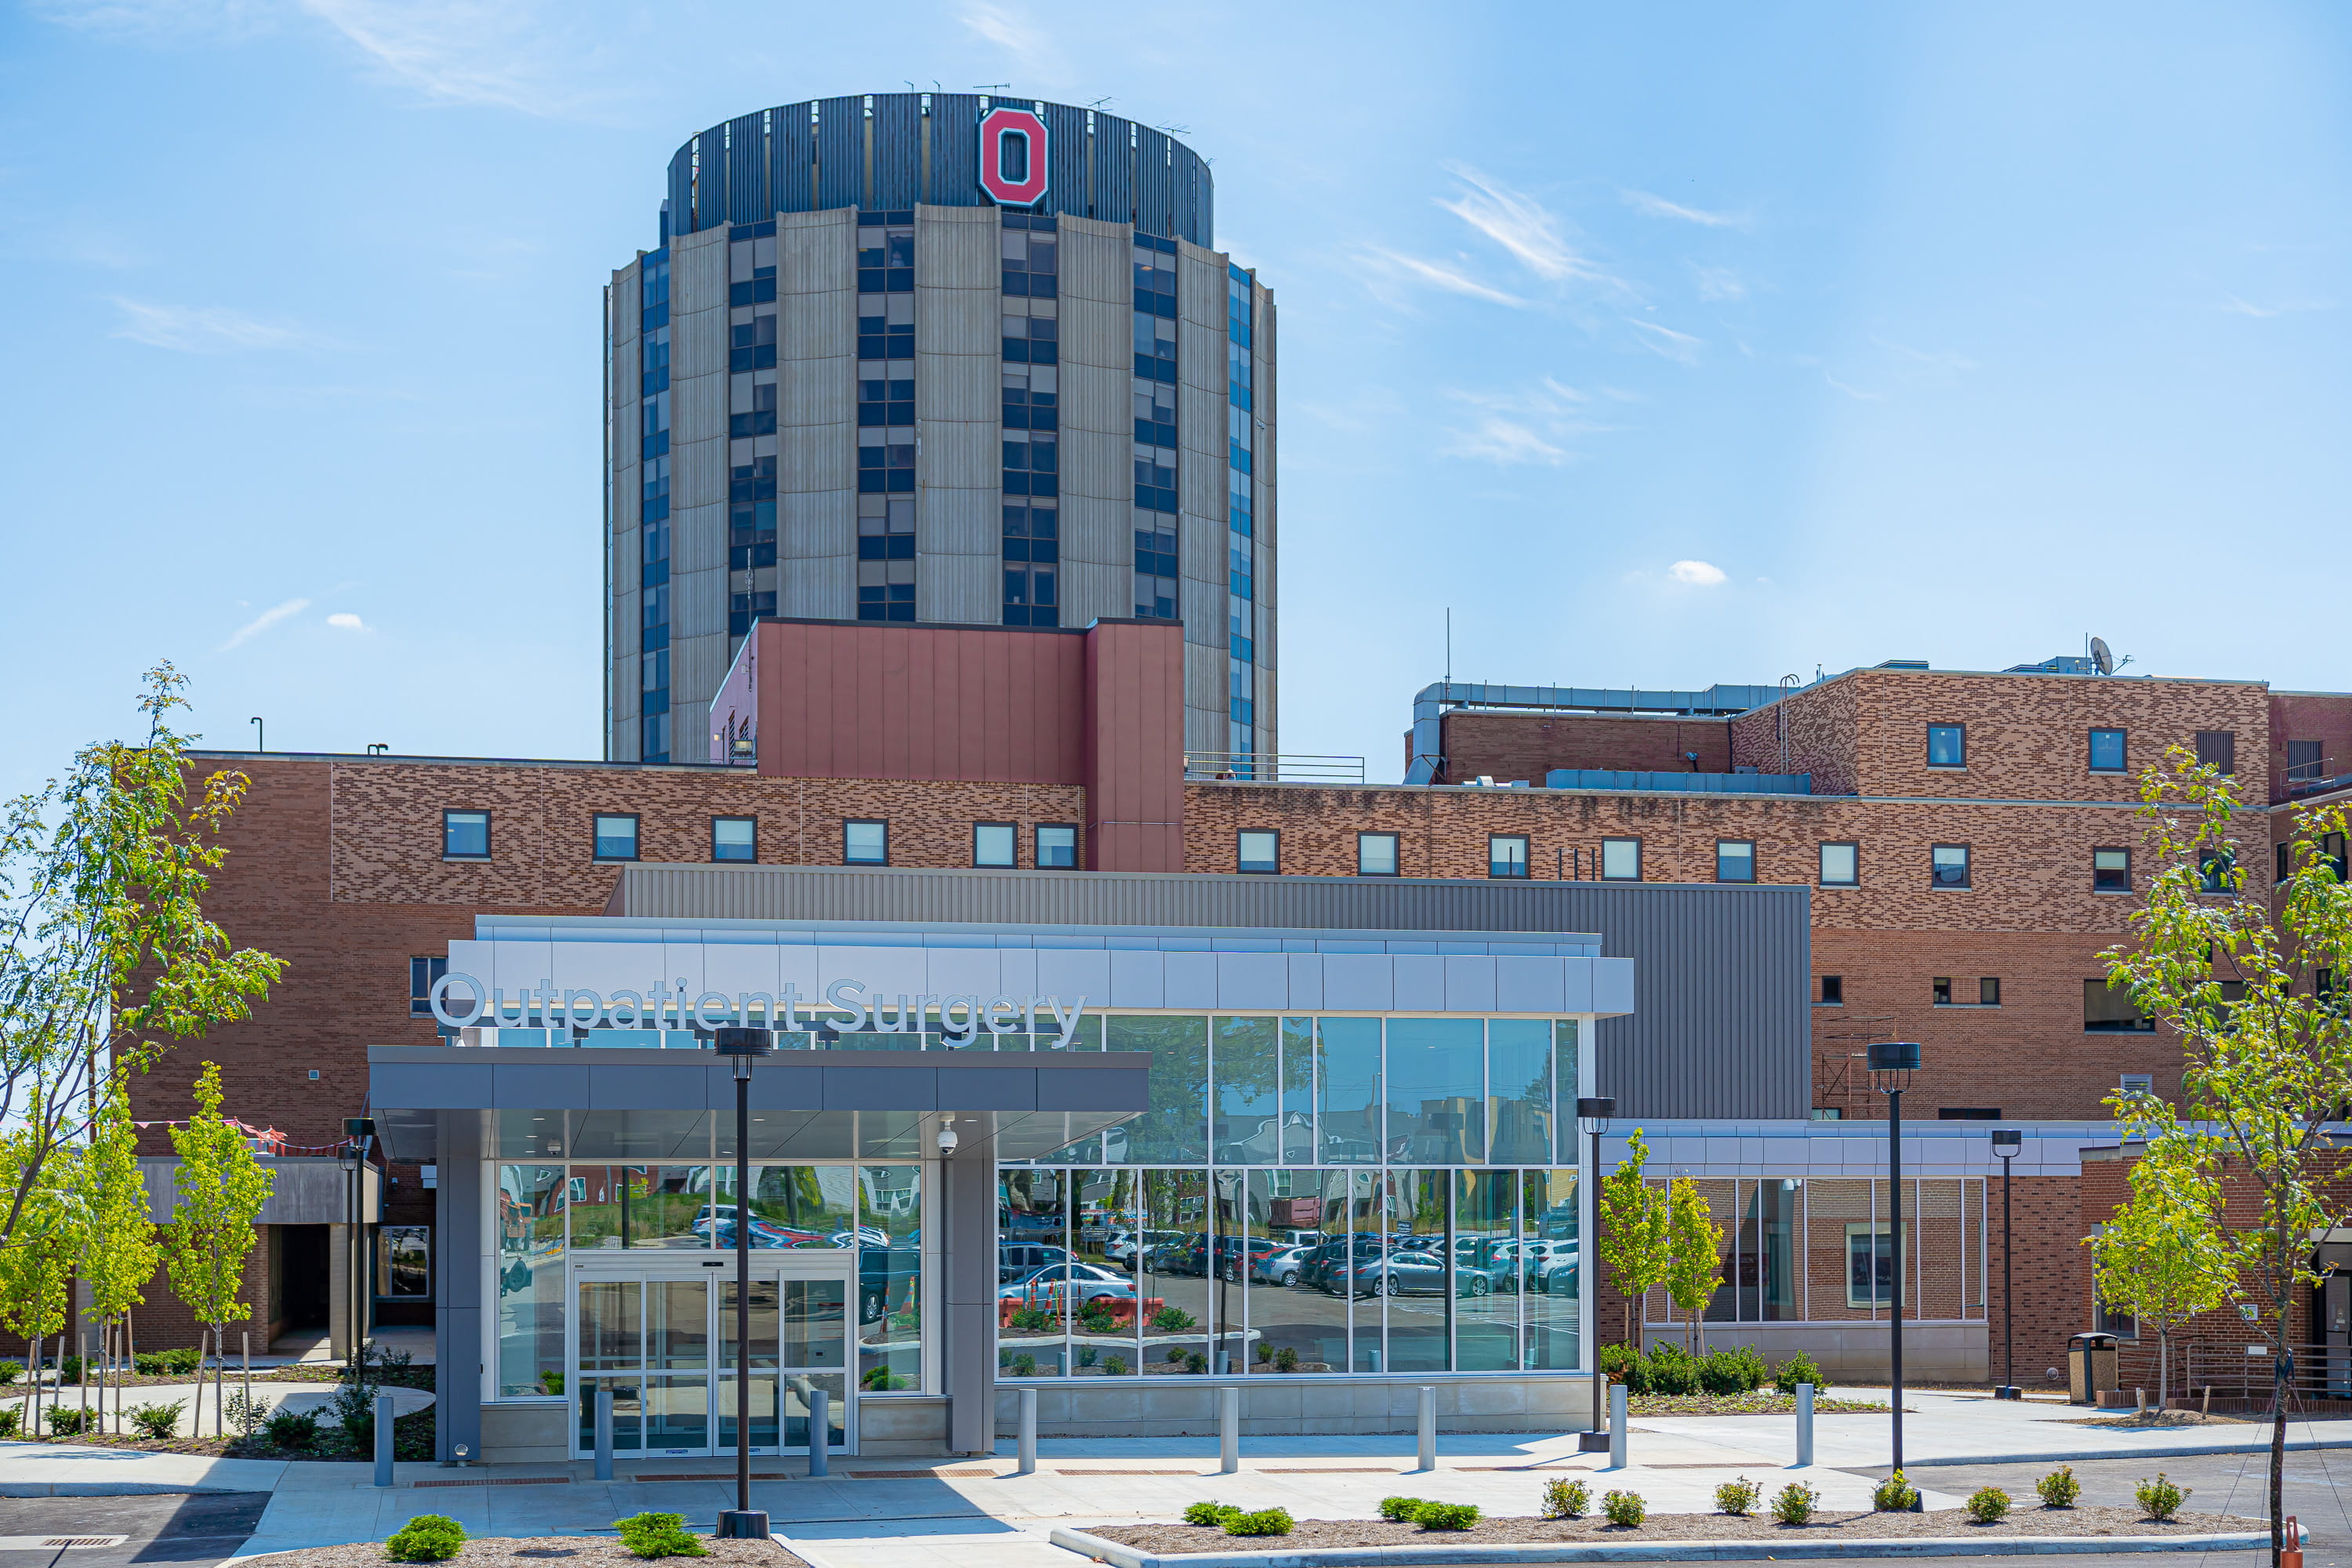 The Ohio State University Wexner Medical Center East